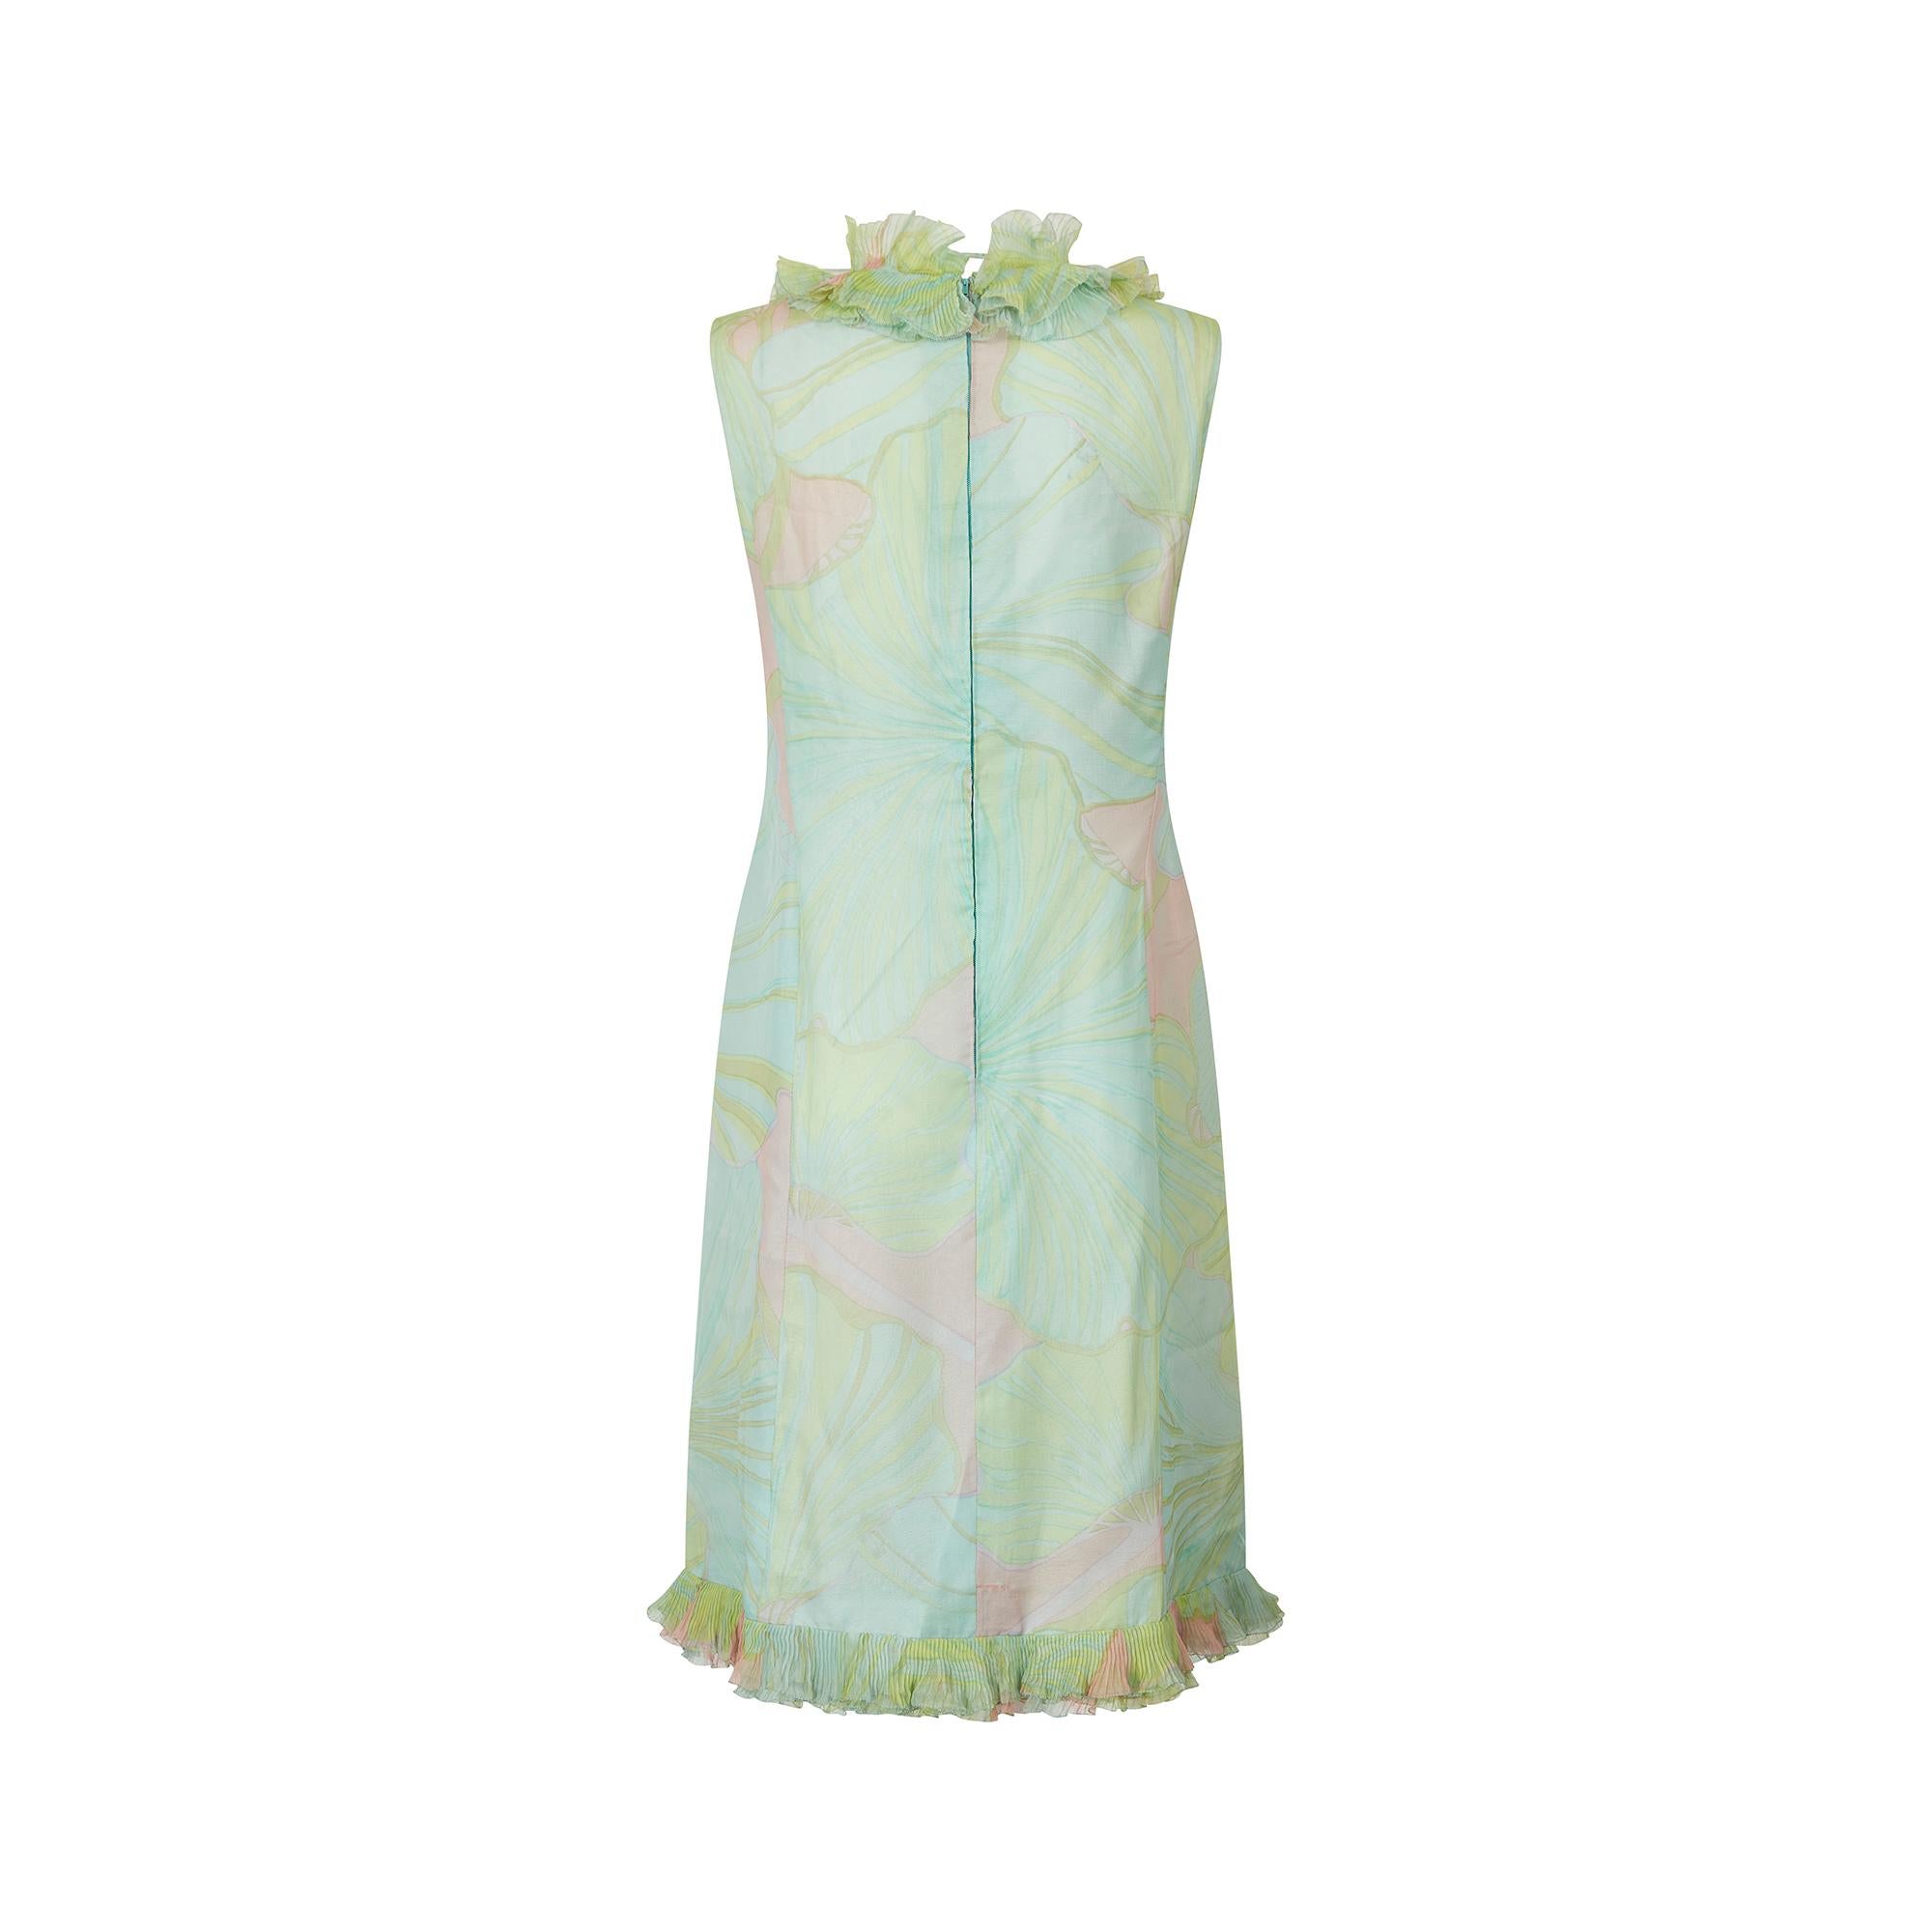 1960s Pastel Silk Chiffon Shift Dress In Excellent Condition For Sale In London, GB